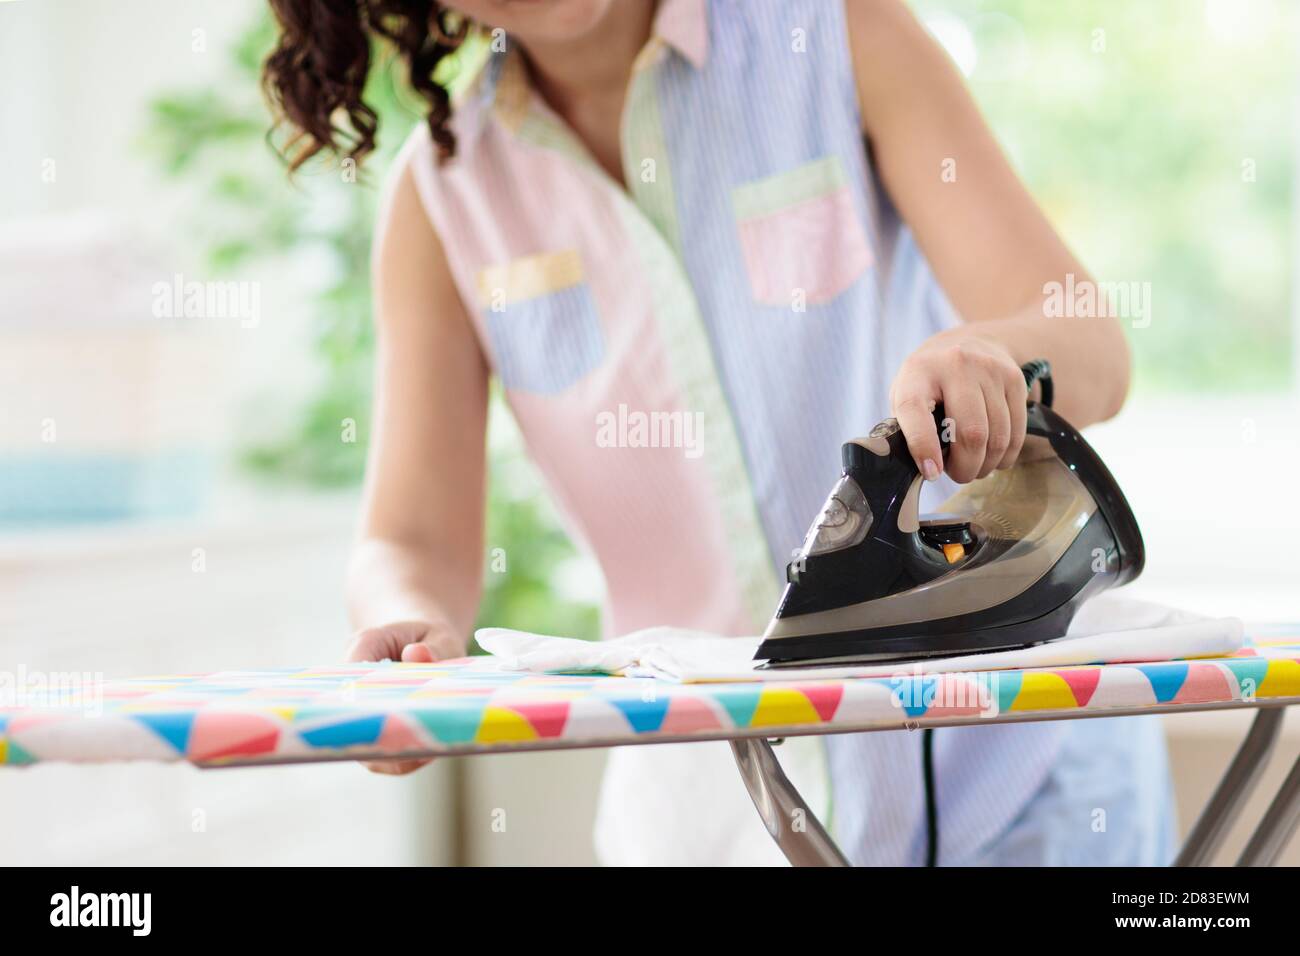 Woman ironing clothes. Female folding clothes at iron board. Home chores. Housewife cleaning house. Stock Photo